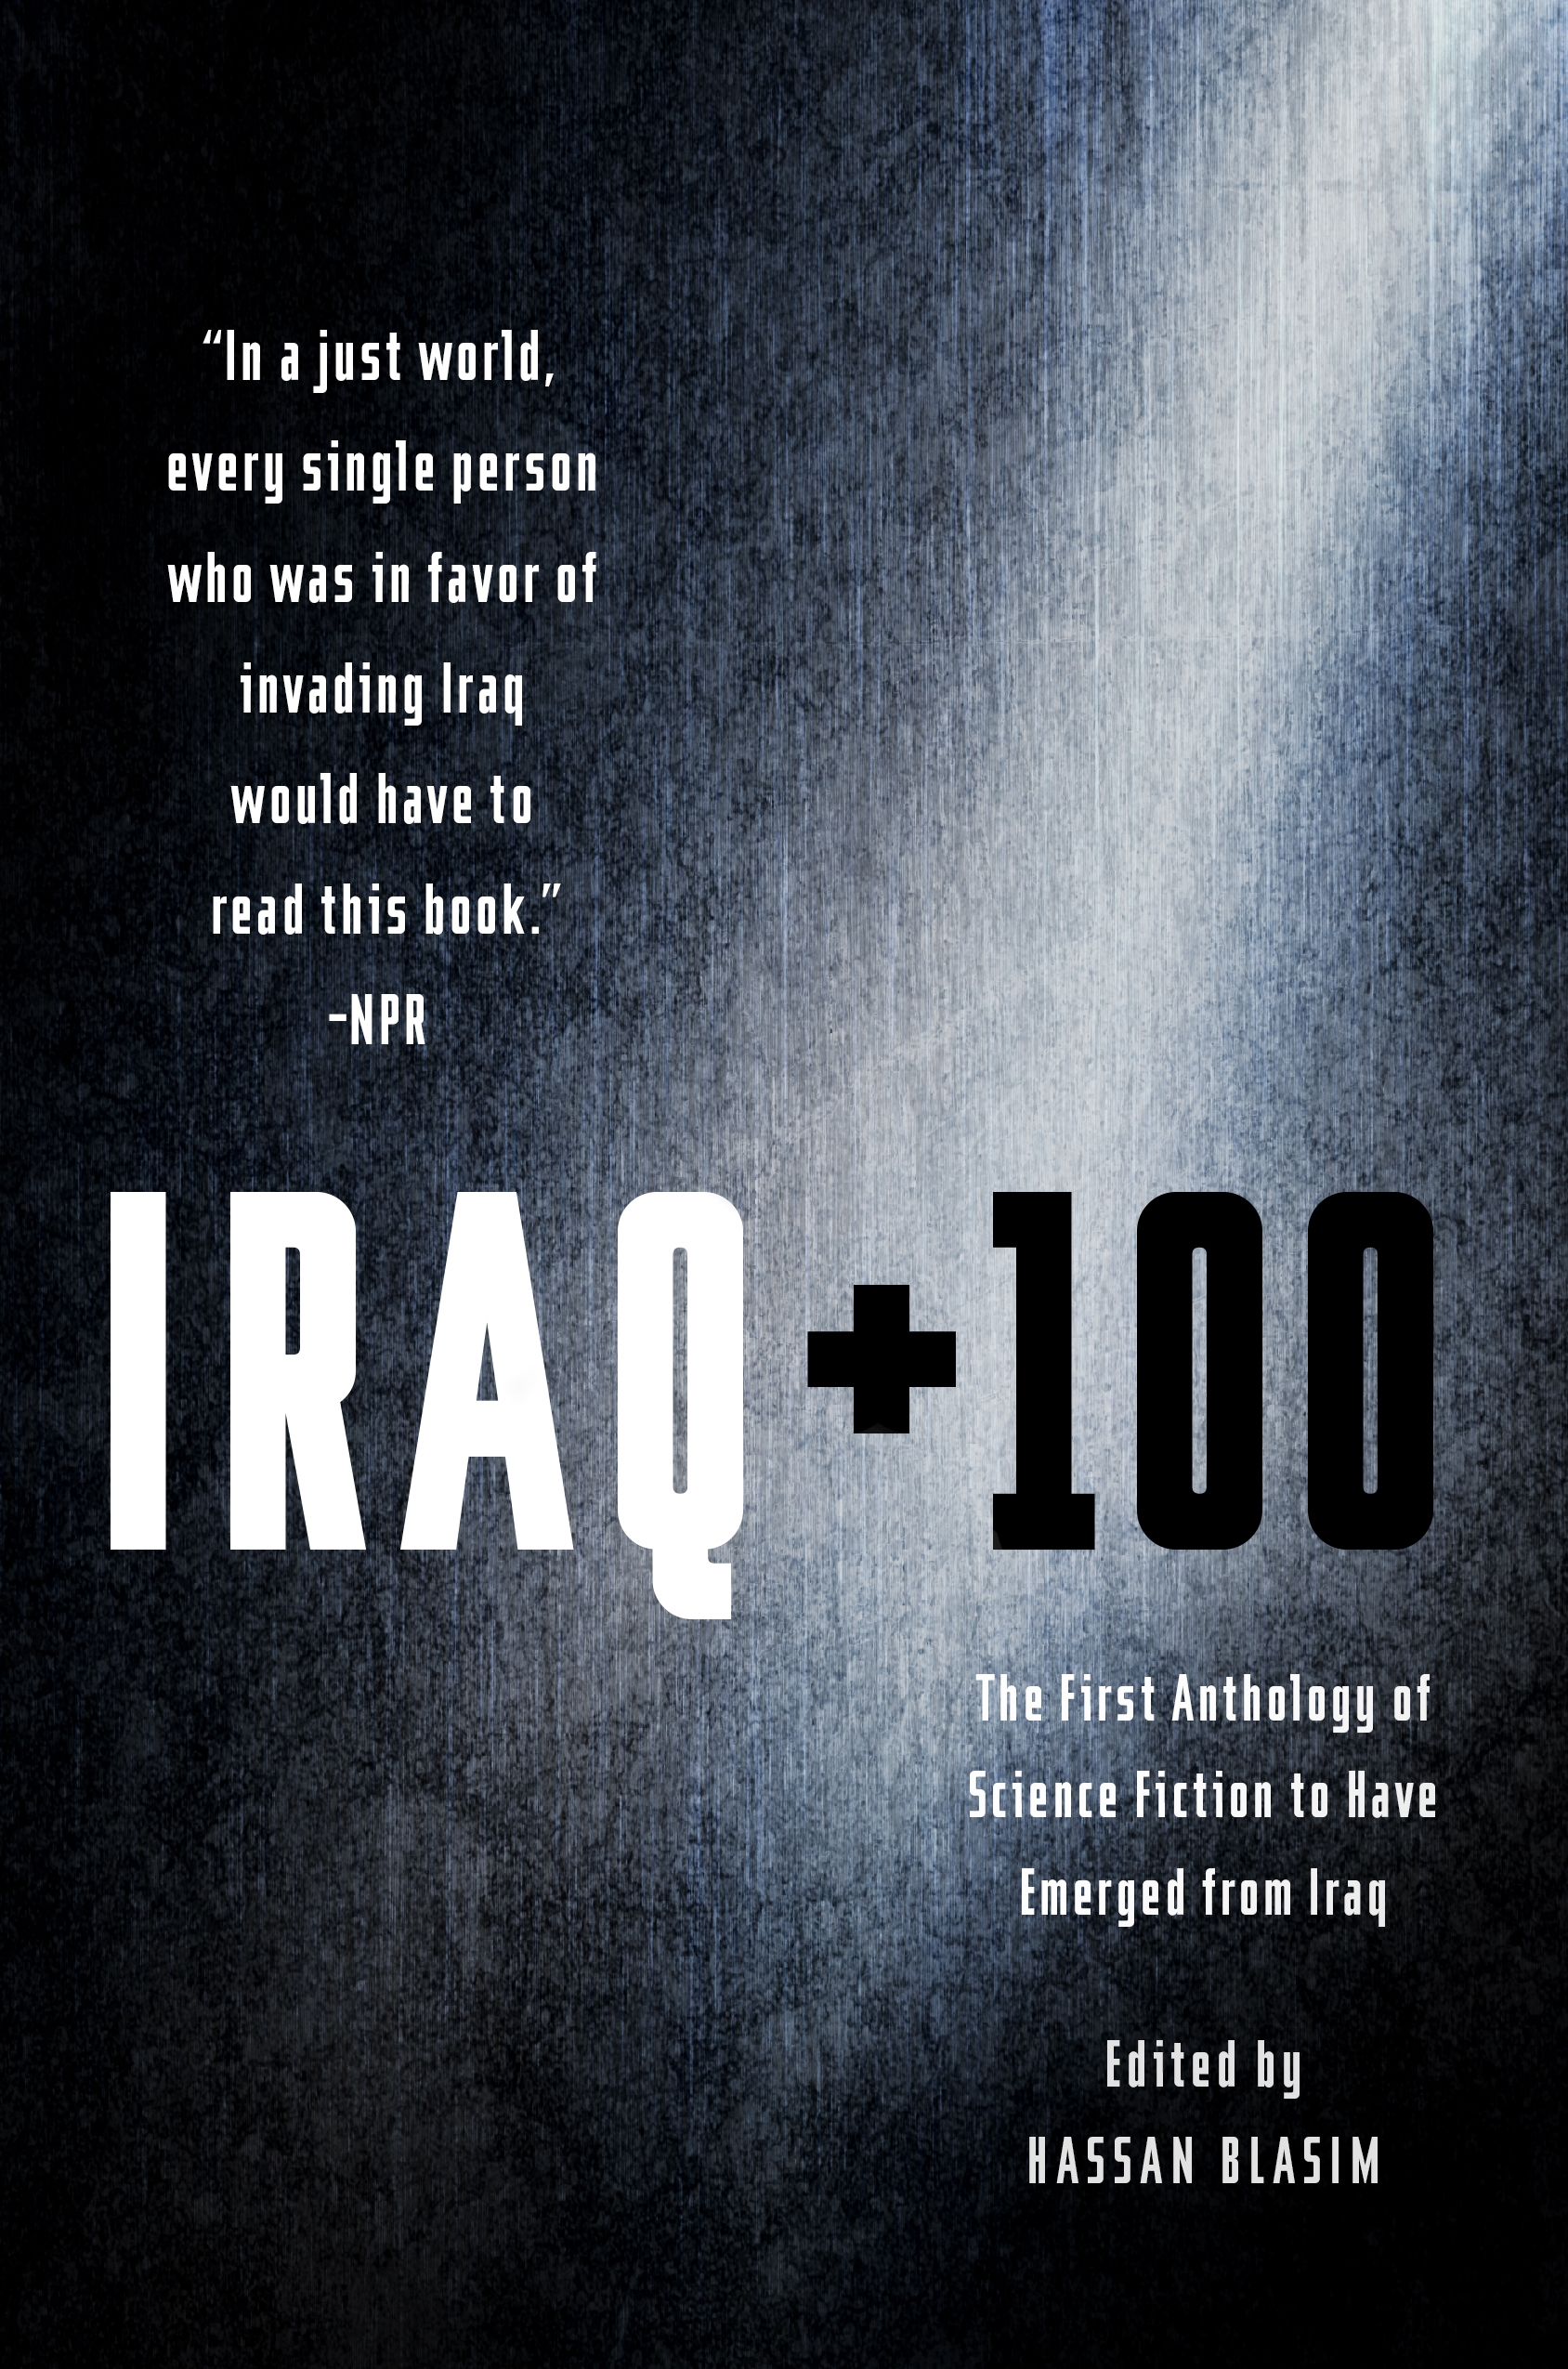 Iraq + 100 : The First Anthology of Science Fiction to Have Emerged from Iraq by Hassan Blasim